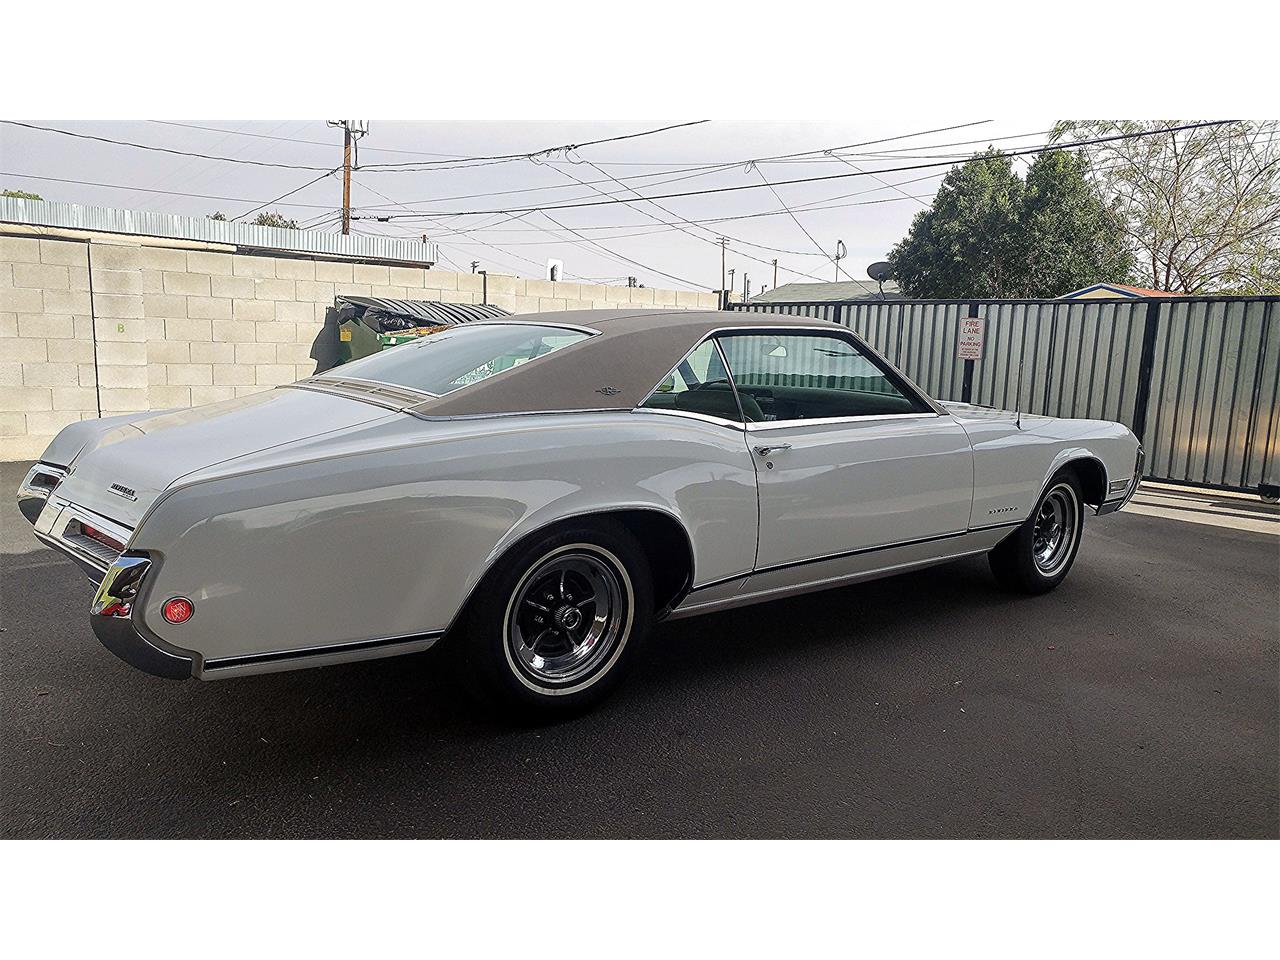 1968 buick riviera for sale classiccars com cc 1085913 1968 buick riviera for sale